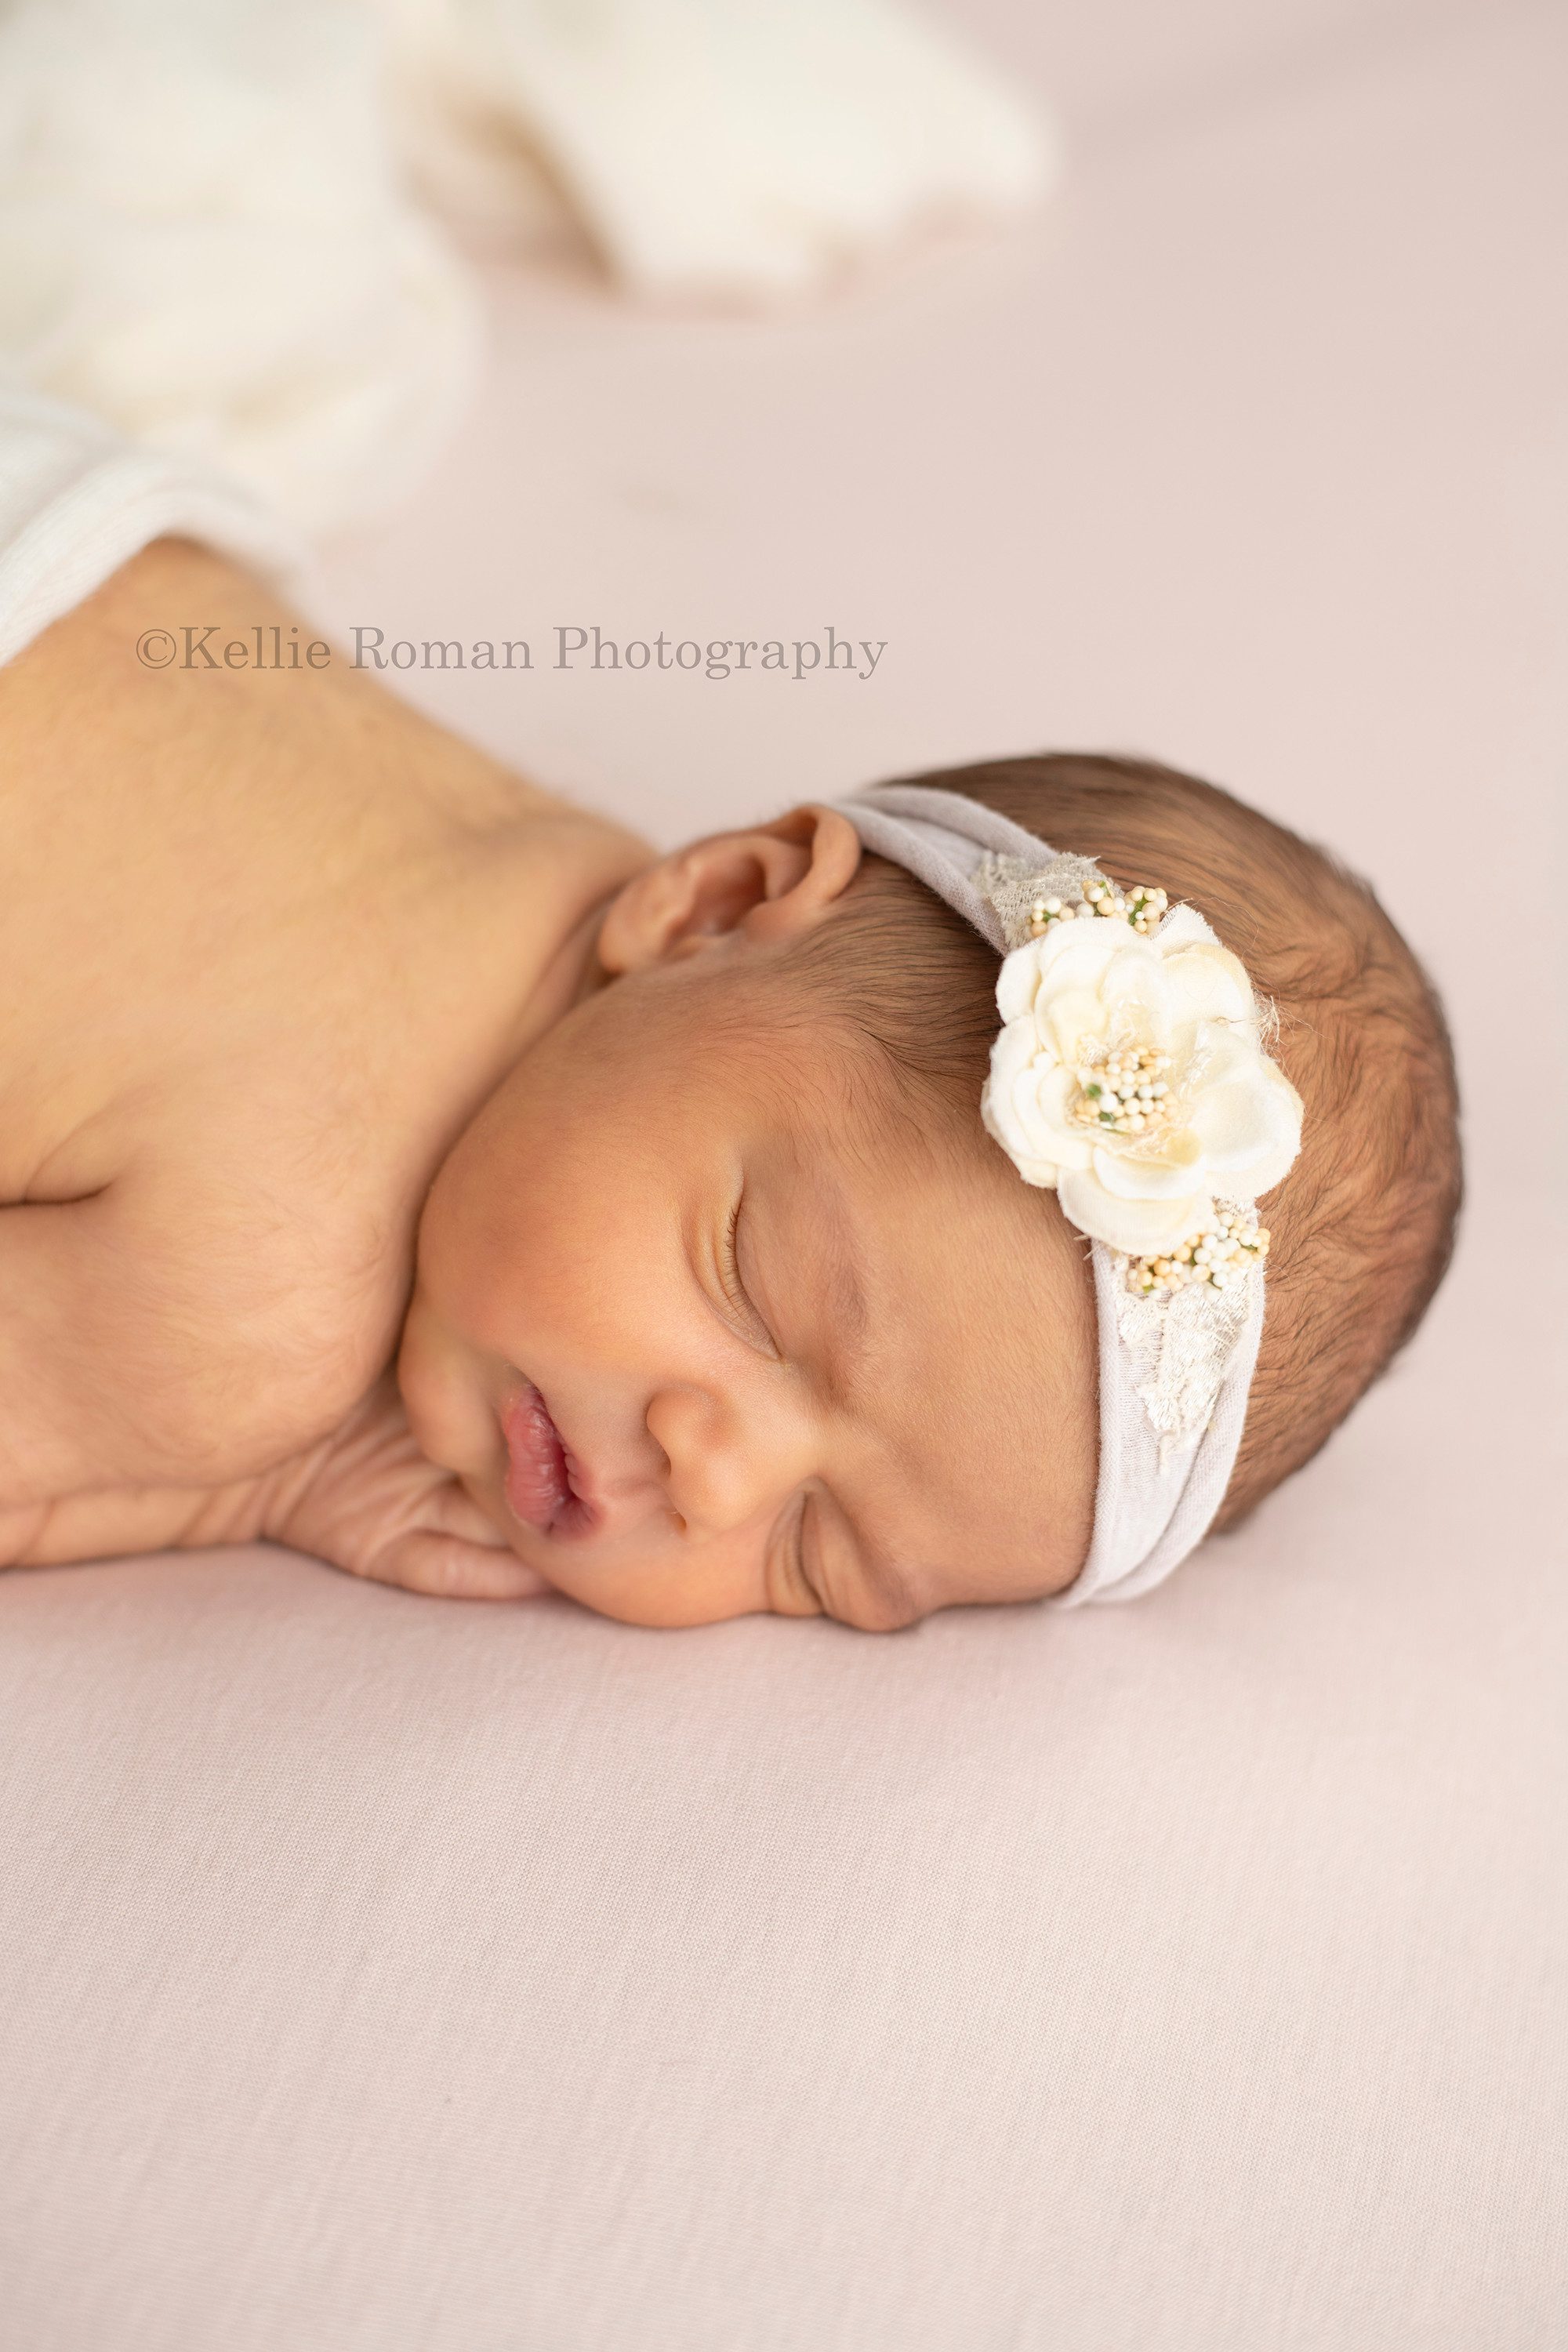 perfect newborn girl baby girl in milwaukee photographers studio she's from Madison Wisconsin and her parents are from kenosha Wisconsin she's sleeping posed with her hands under her cheeks onto of a very light pink blanket she has a white floral headband on